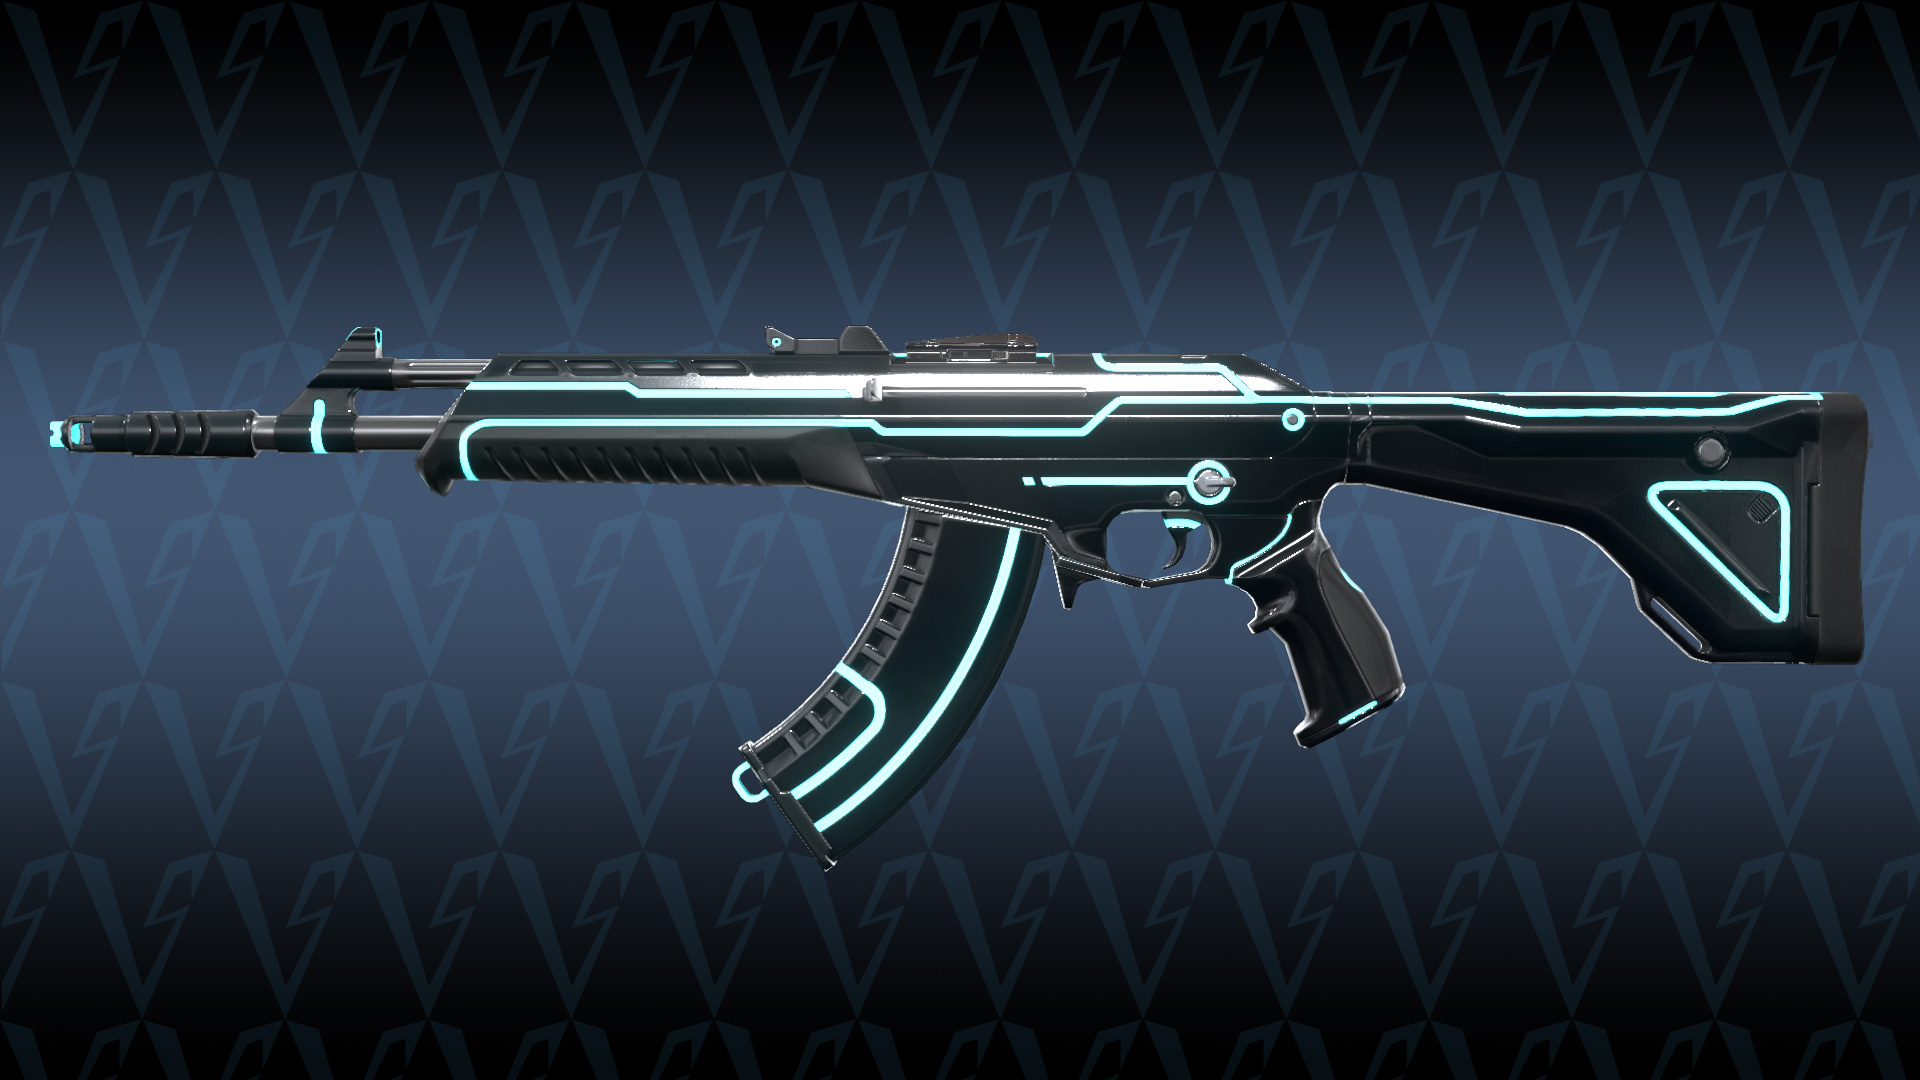 Valorant dot exe Vandal Collection: A limited-edition weapon skin collection in Valorant featuring futuristic and sleek designs.
Exclusive weapon skins: Unique skins for the Vandal rifle in Valorant, available only through the dot exe collection.